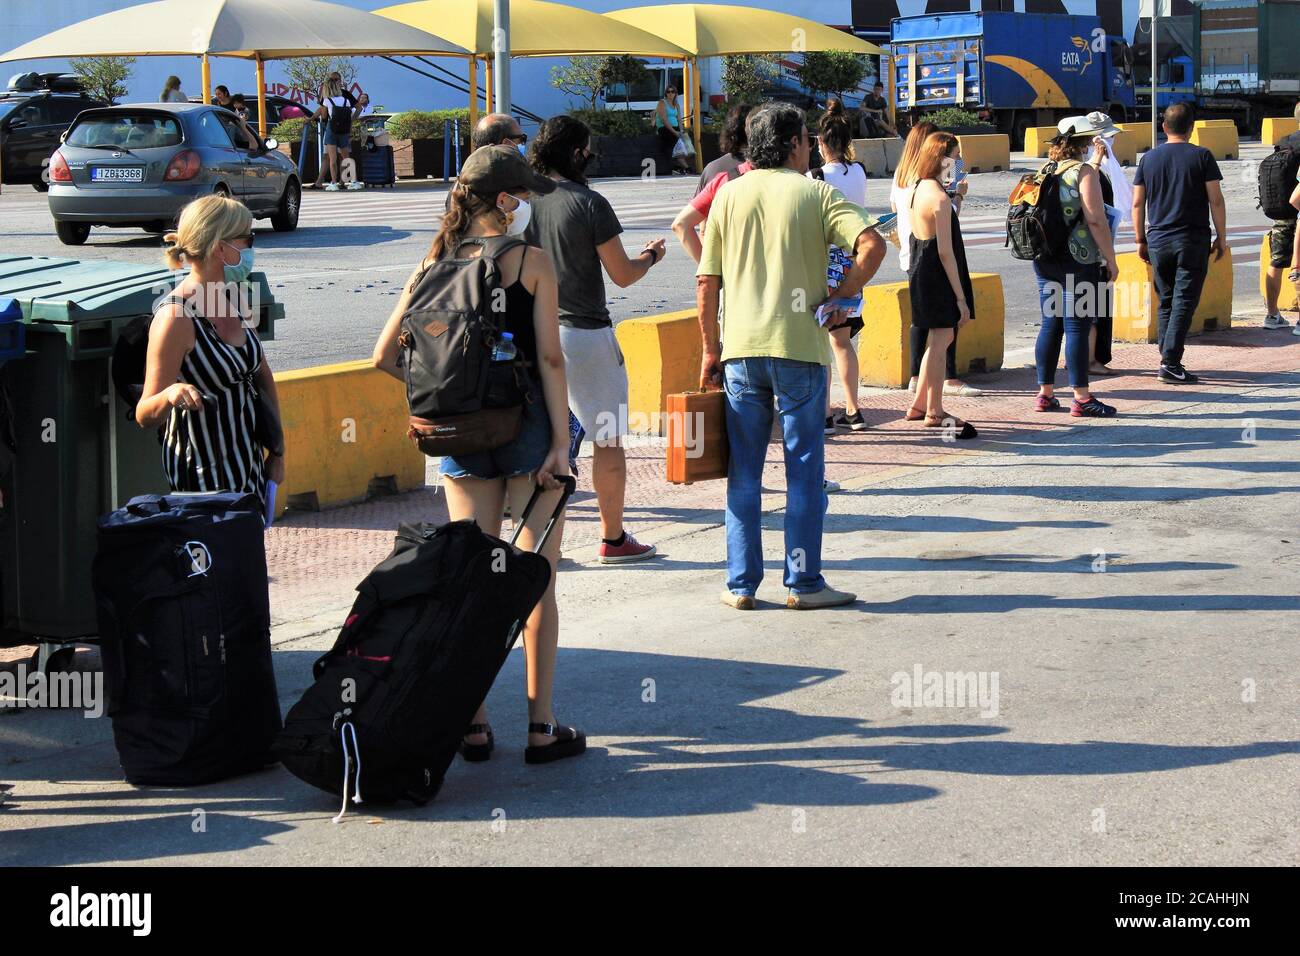 Greece, Piraeus, August 1 2020 - Passengers waiting for buying tickets and embark on a ferry boat with Greek islands as destination. Stock Photo